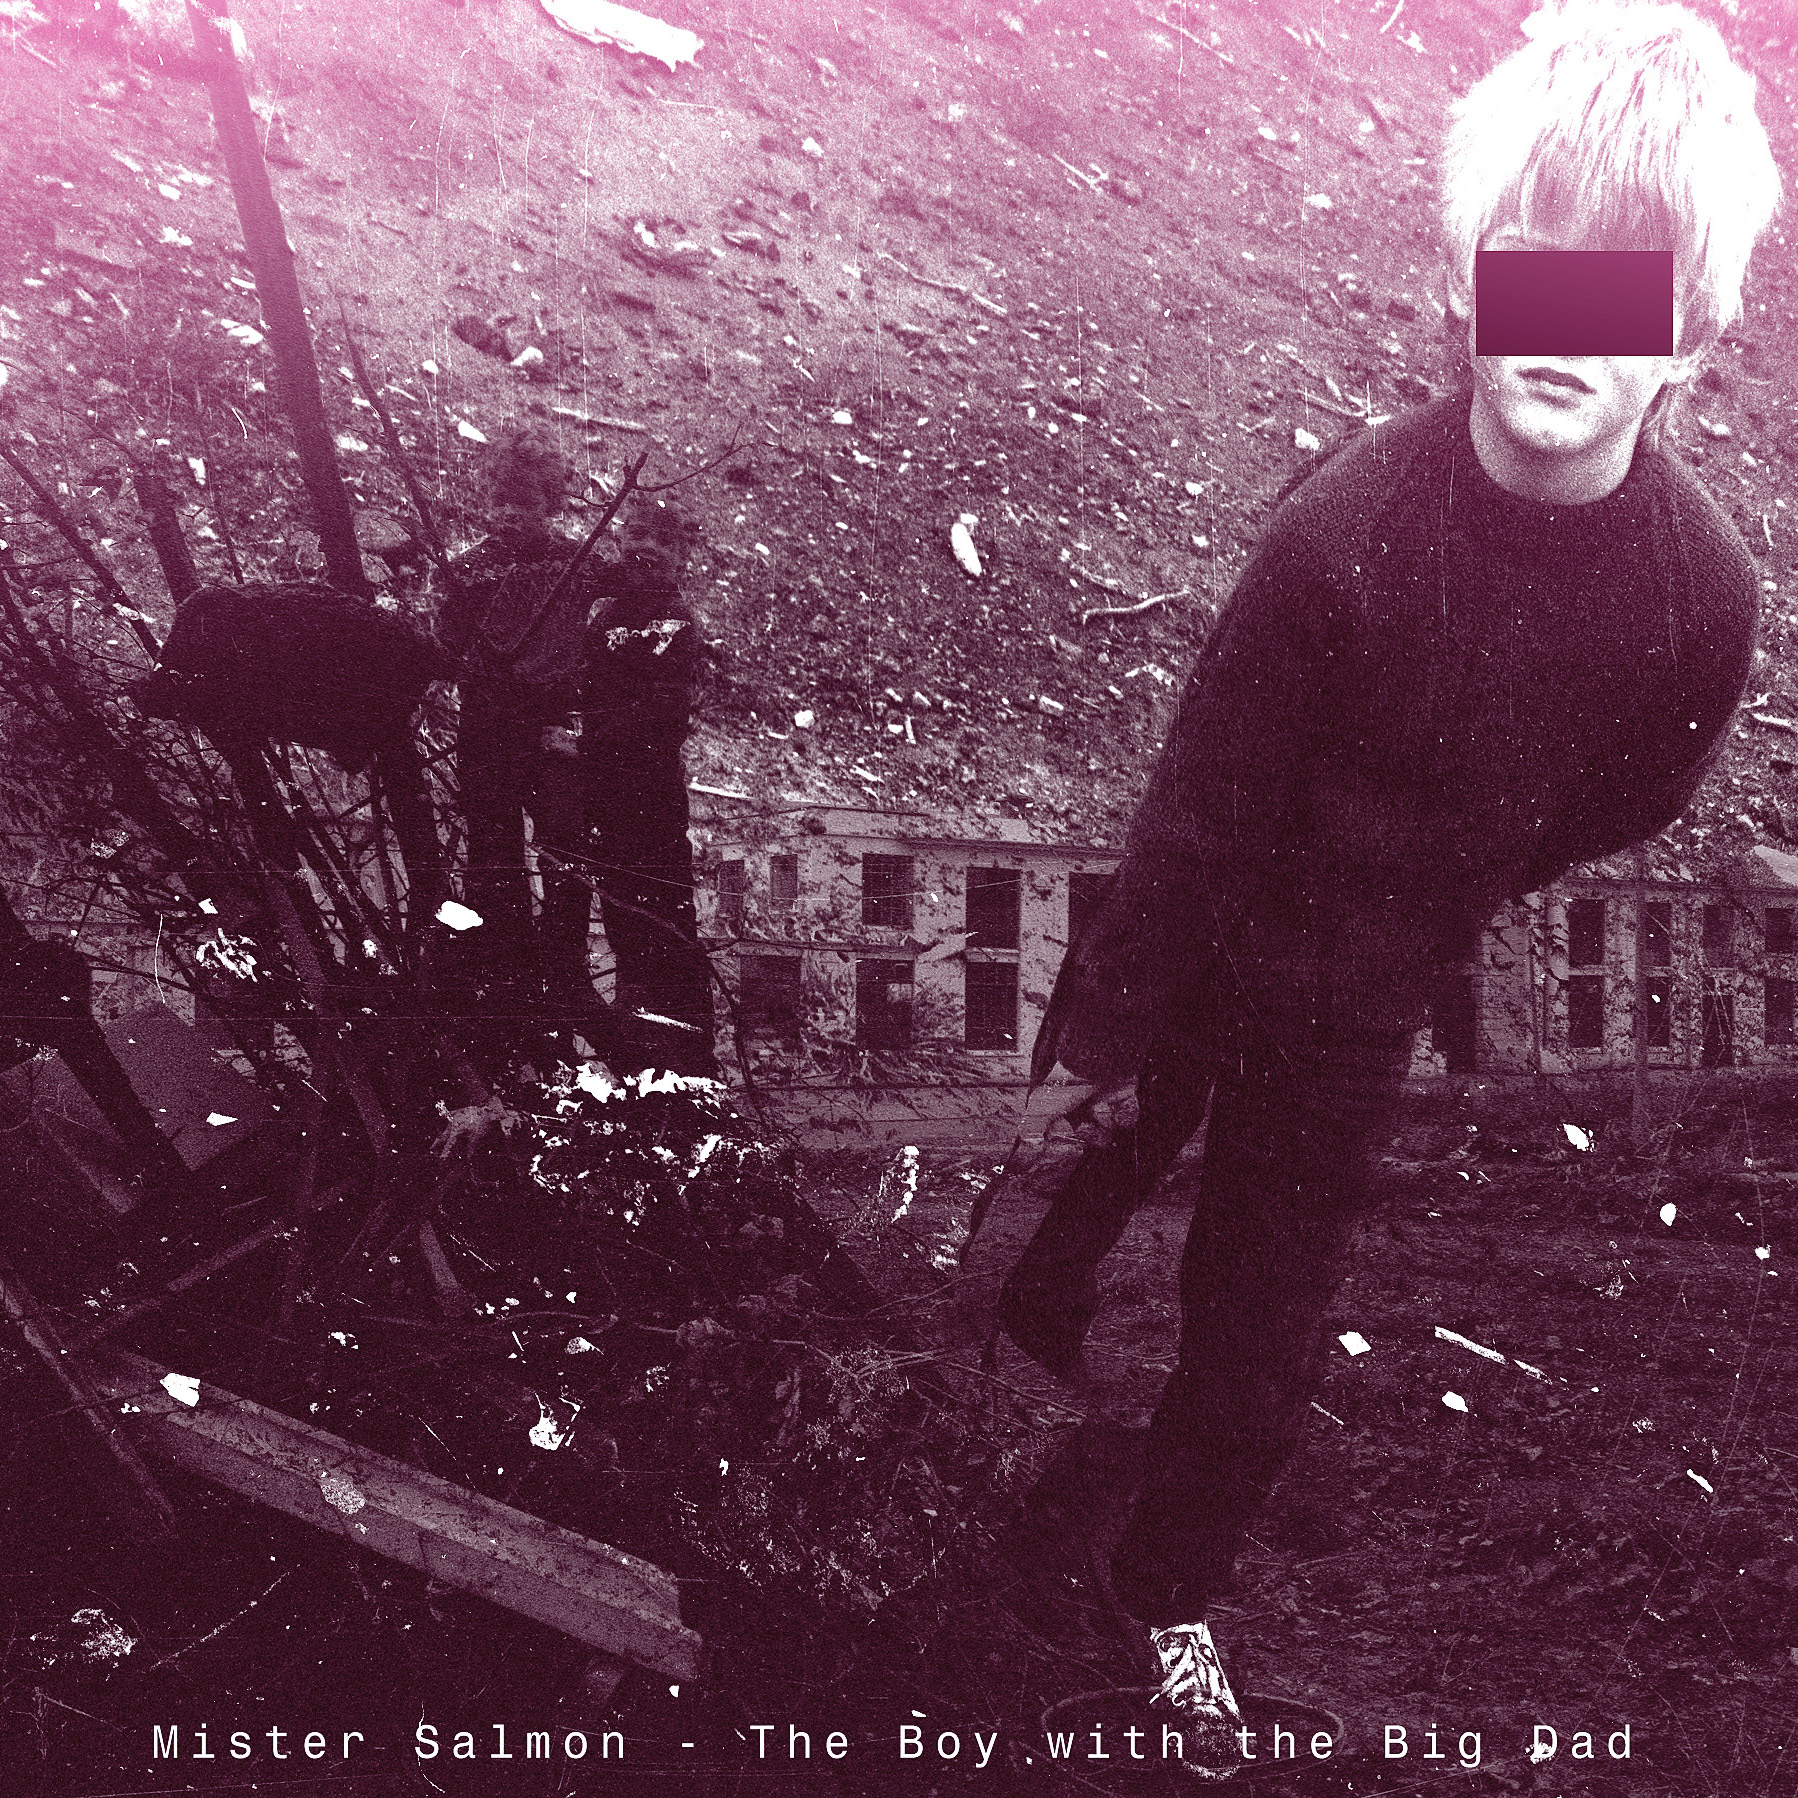 Mister Salmon ...in Yorkshirama (2010) - Track-image no. 3: 'The Boy with the Big Dad'